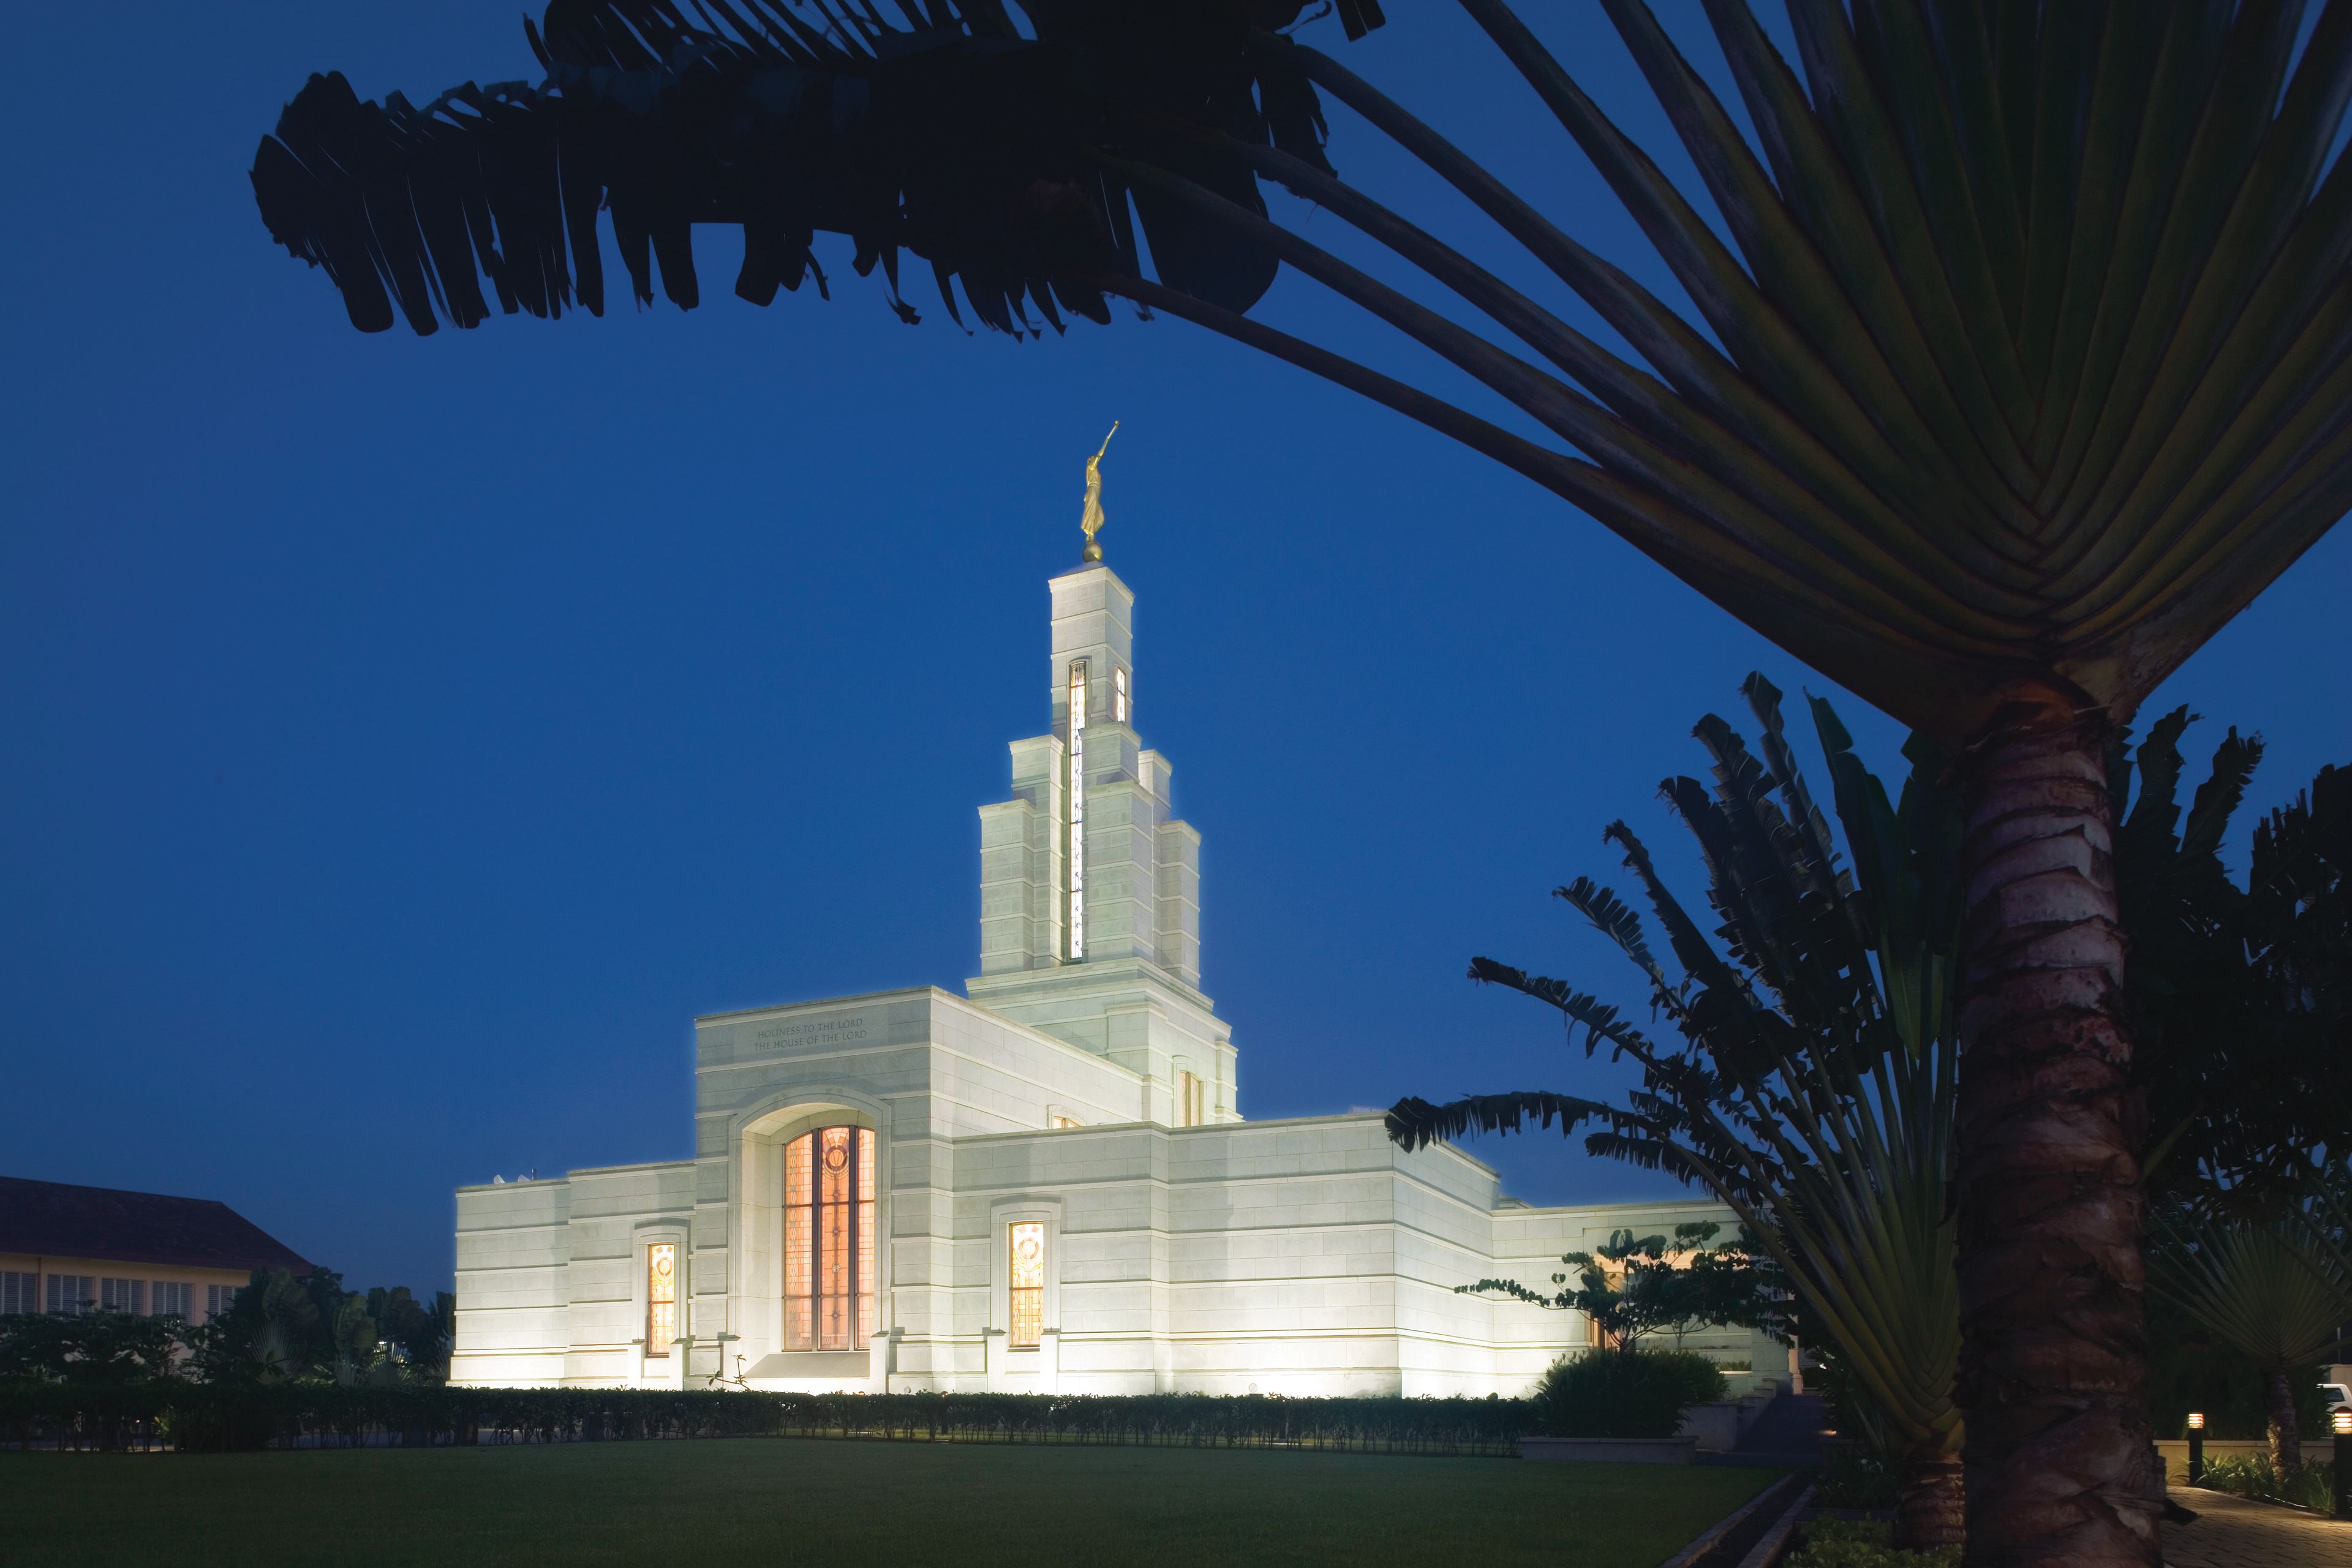 The Accra Ghana Temple is lit up at night.